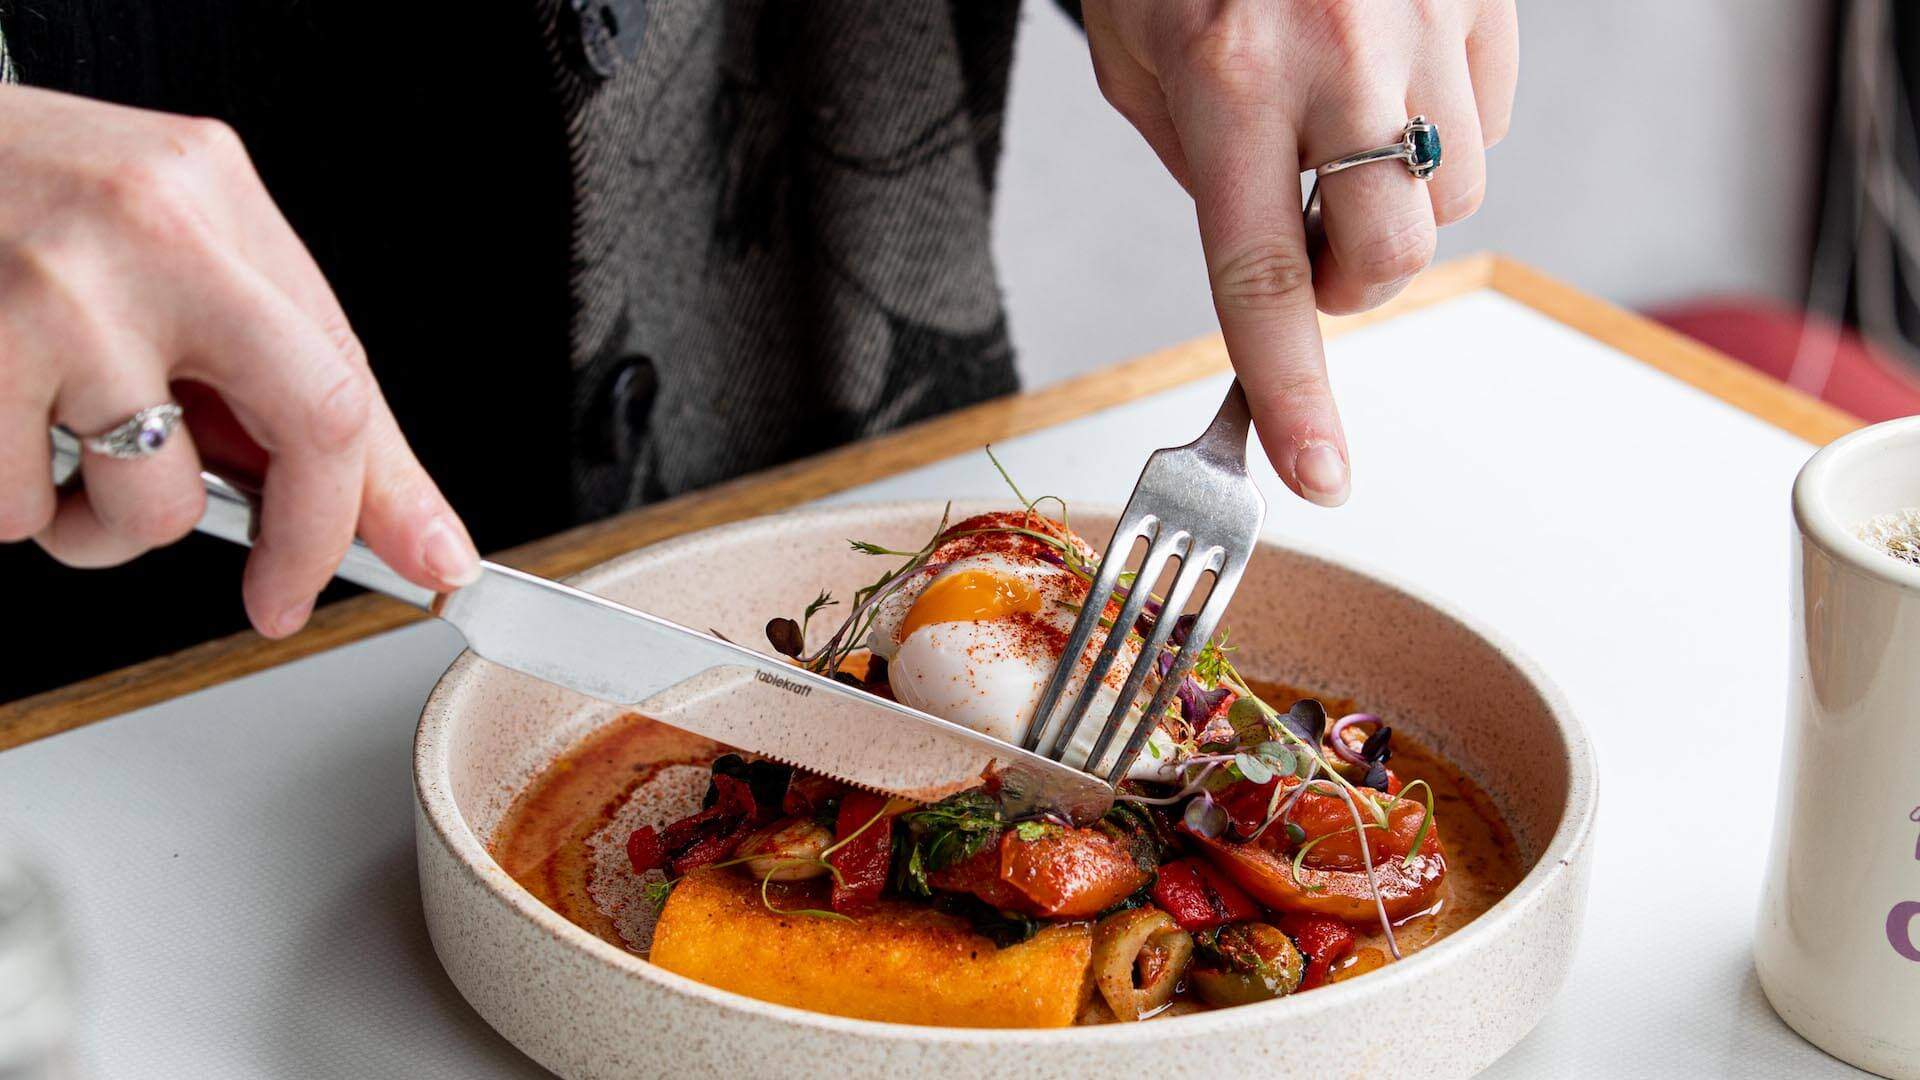 Where to Find the Best Breakfast in Melbourne